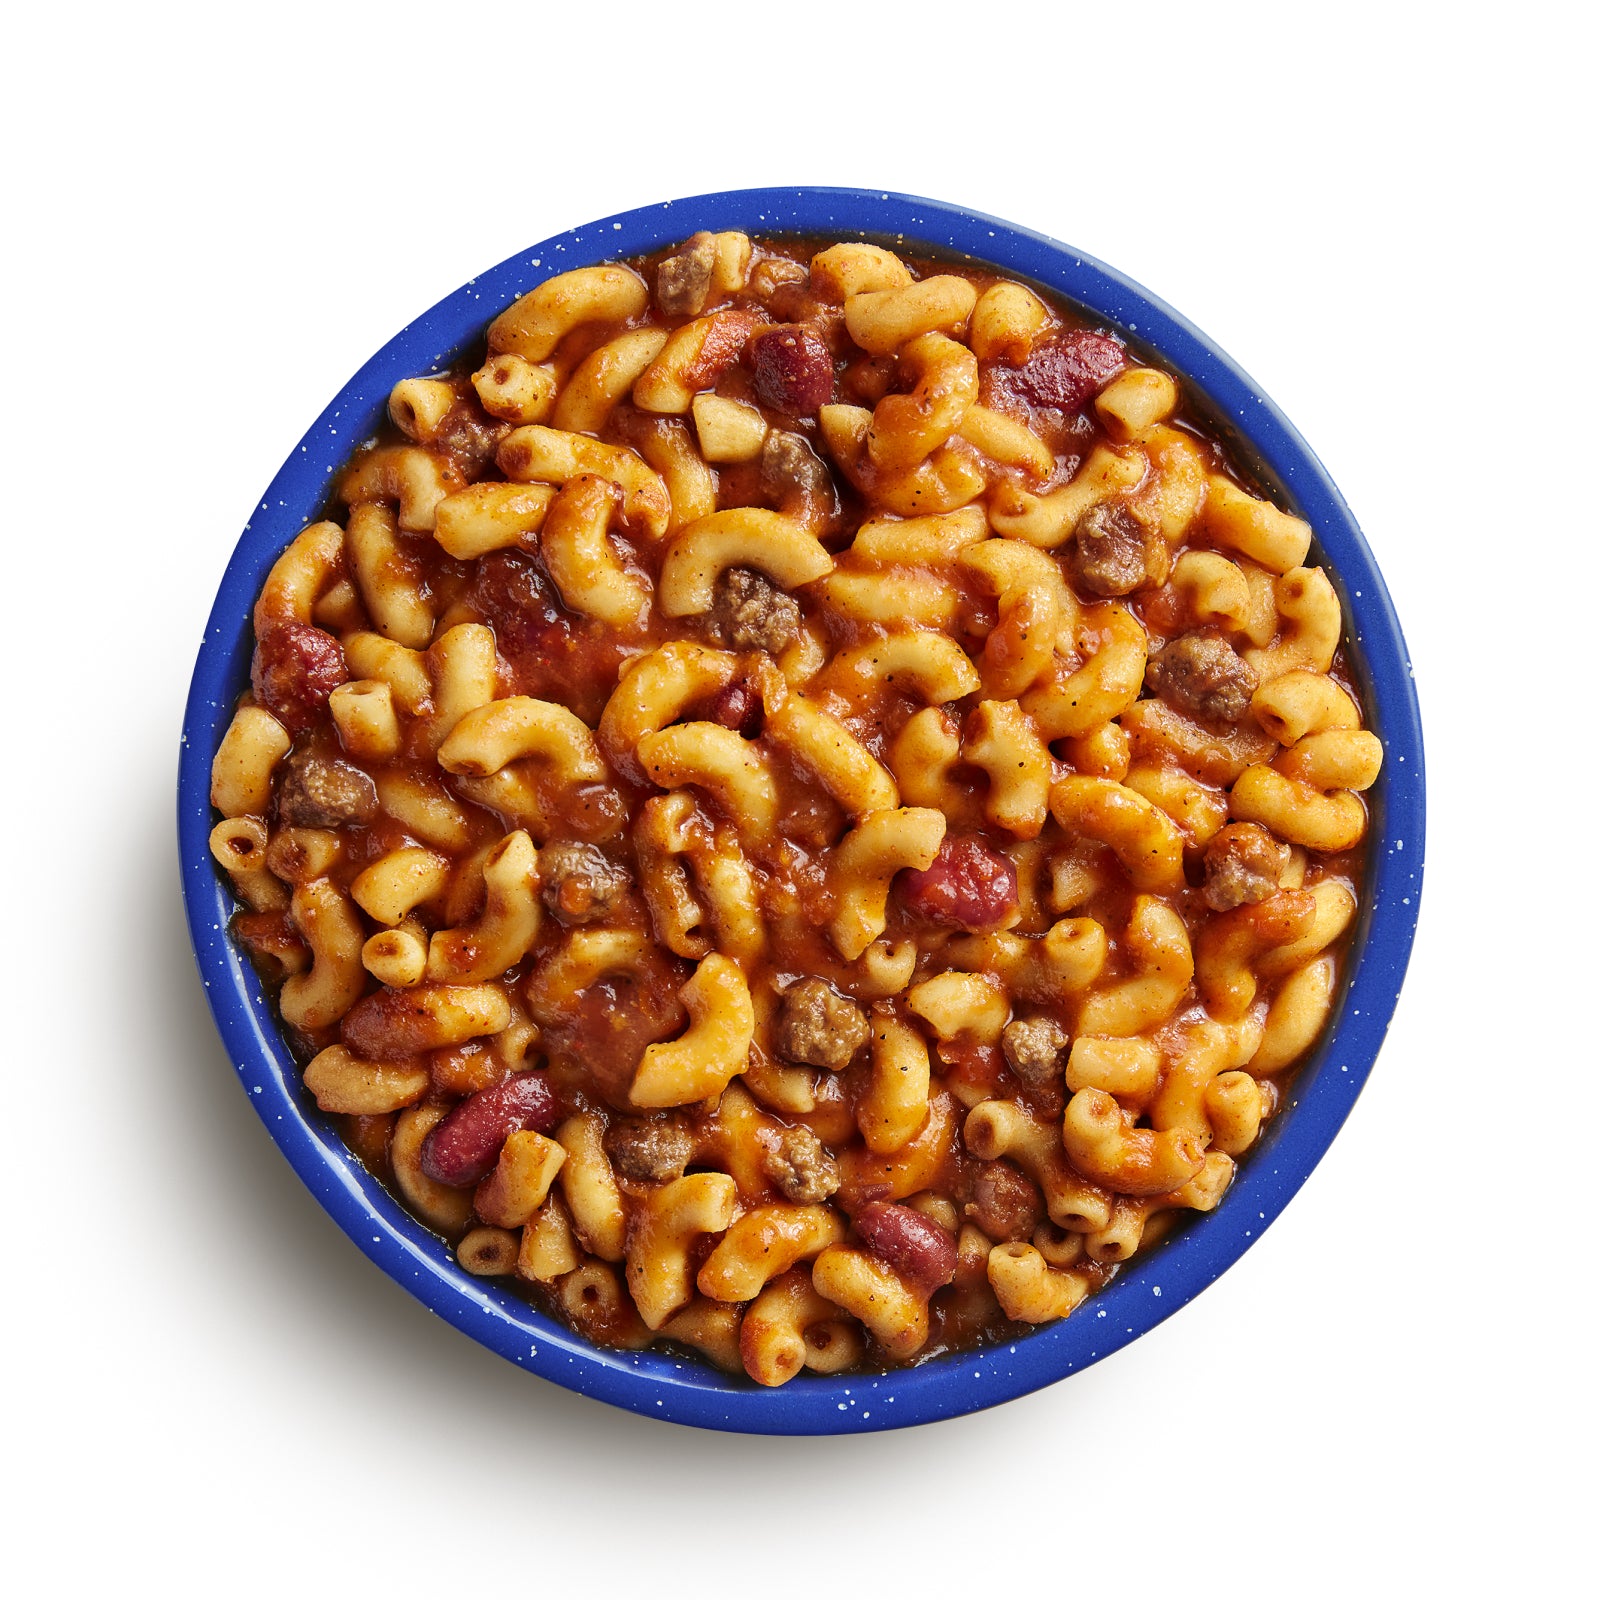 55106 Chili Mac with Beef Adventure Meal Prepared